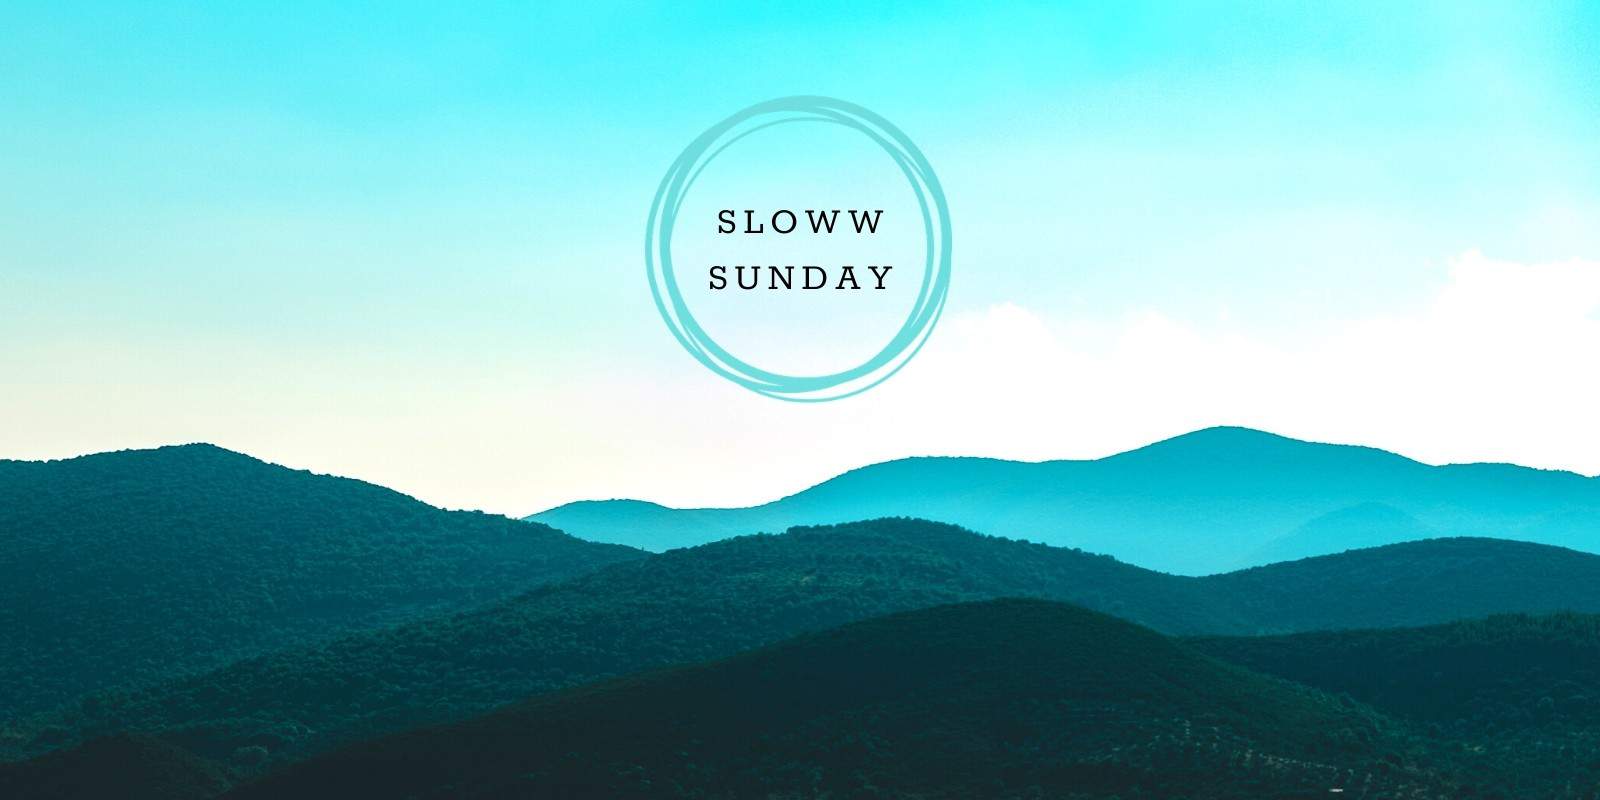 Sloww Sunday Newsletter 052 (Mar 7, 2021) — Effective Habits, Intro to Stoicism, & More